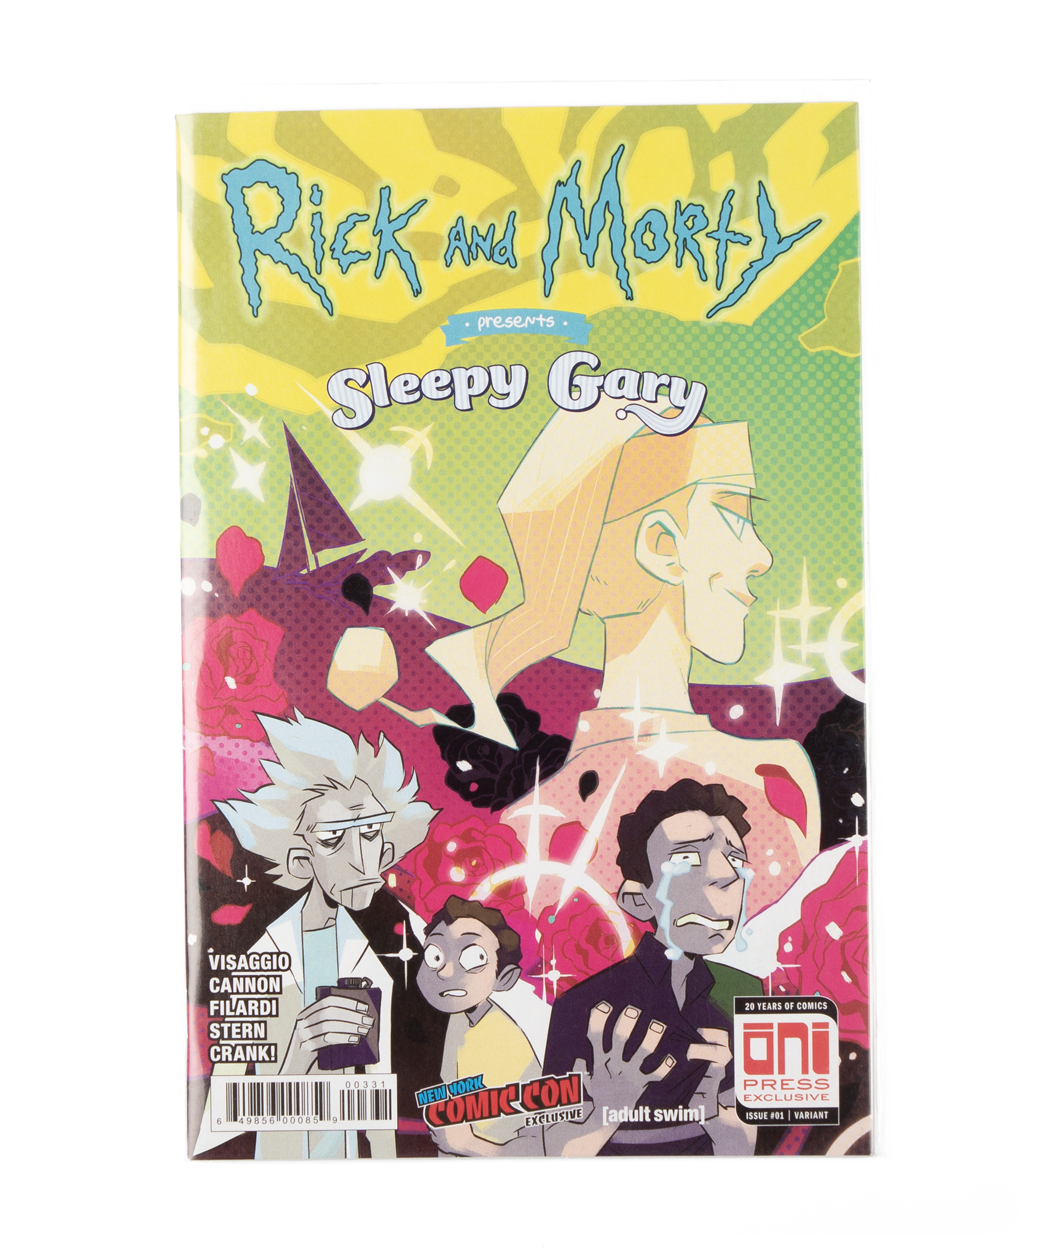 A cover of a zine of "Rick and Morty; presents Sleepy Gary". 